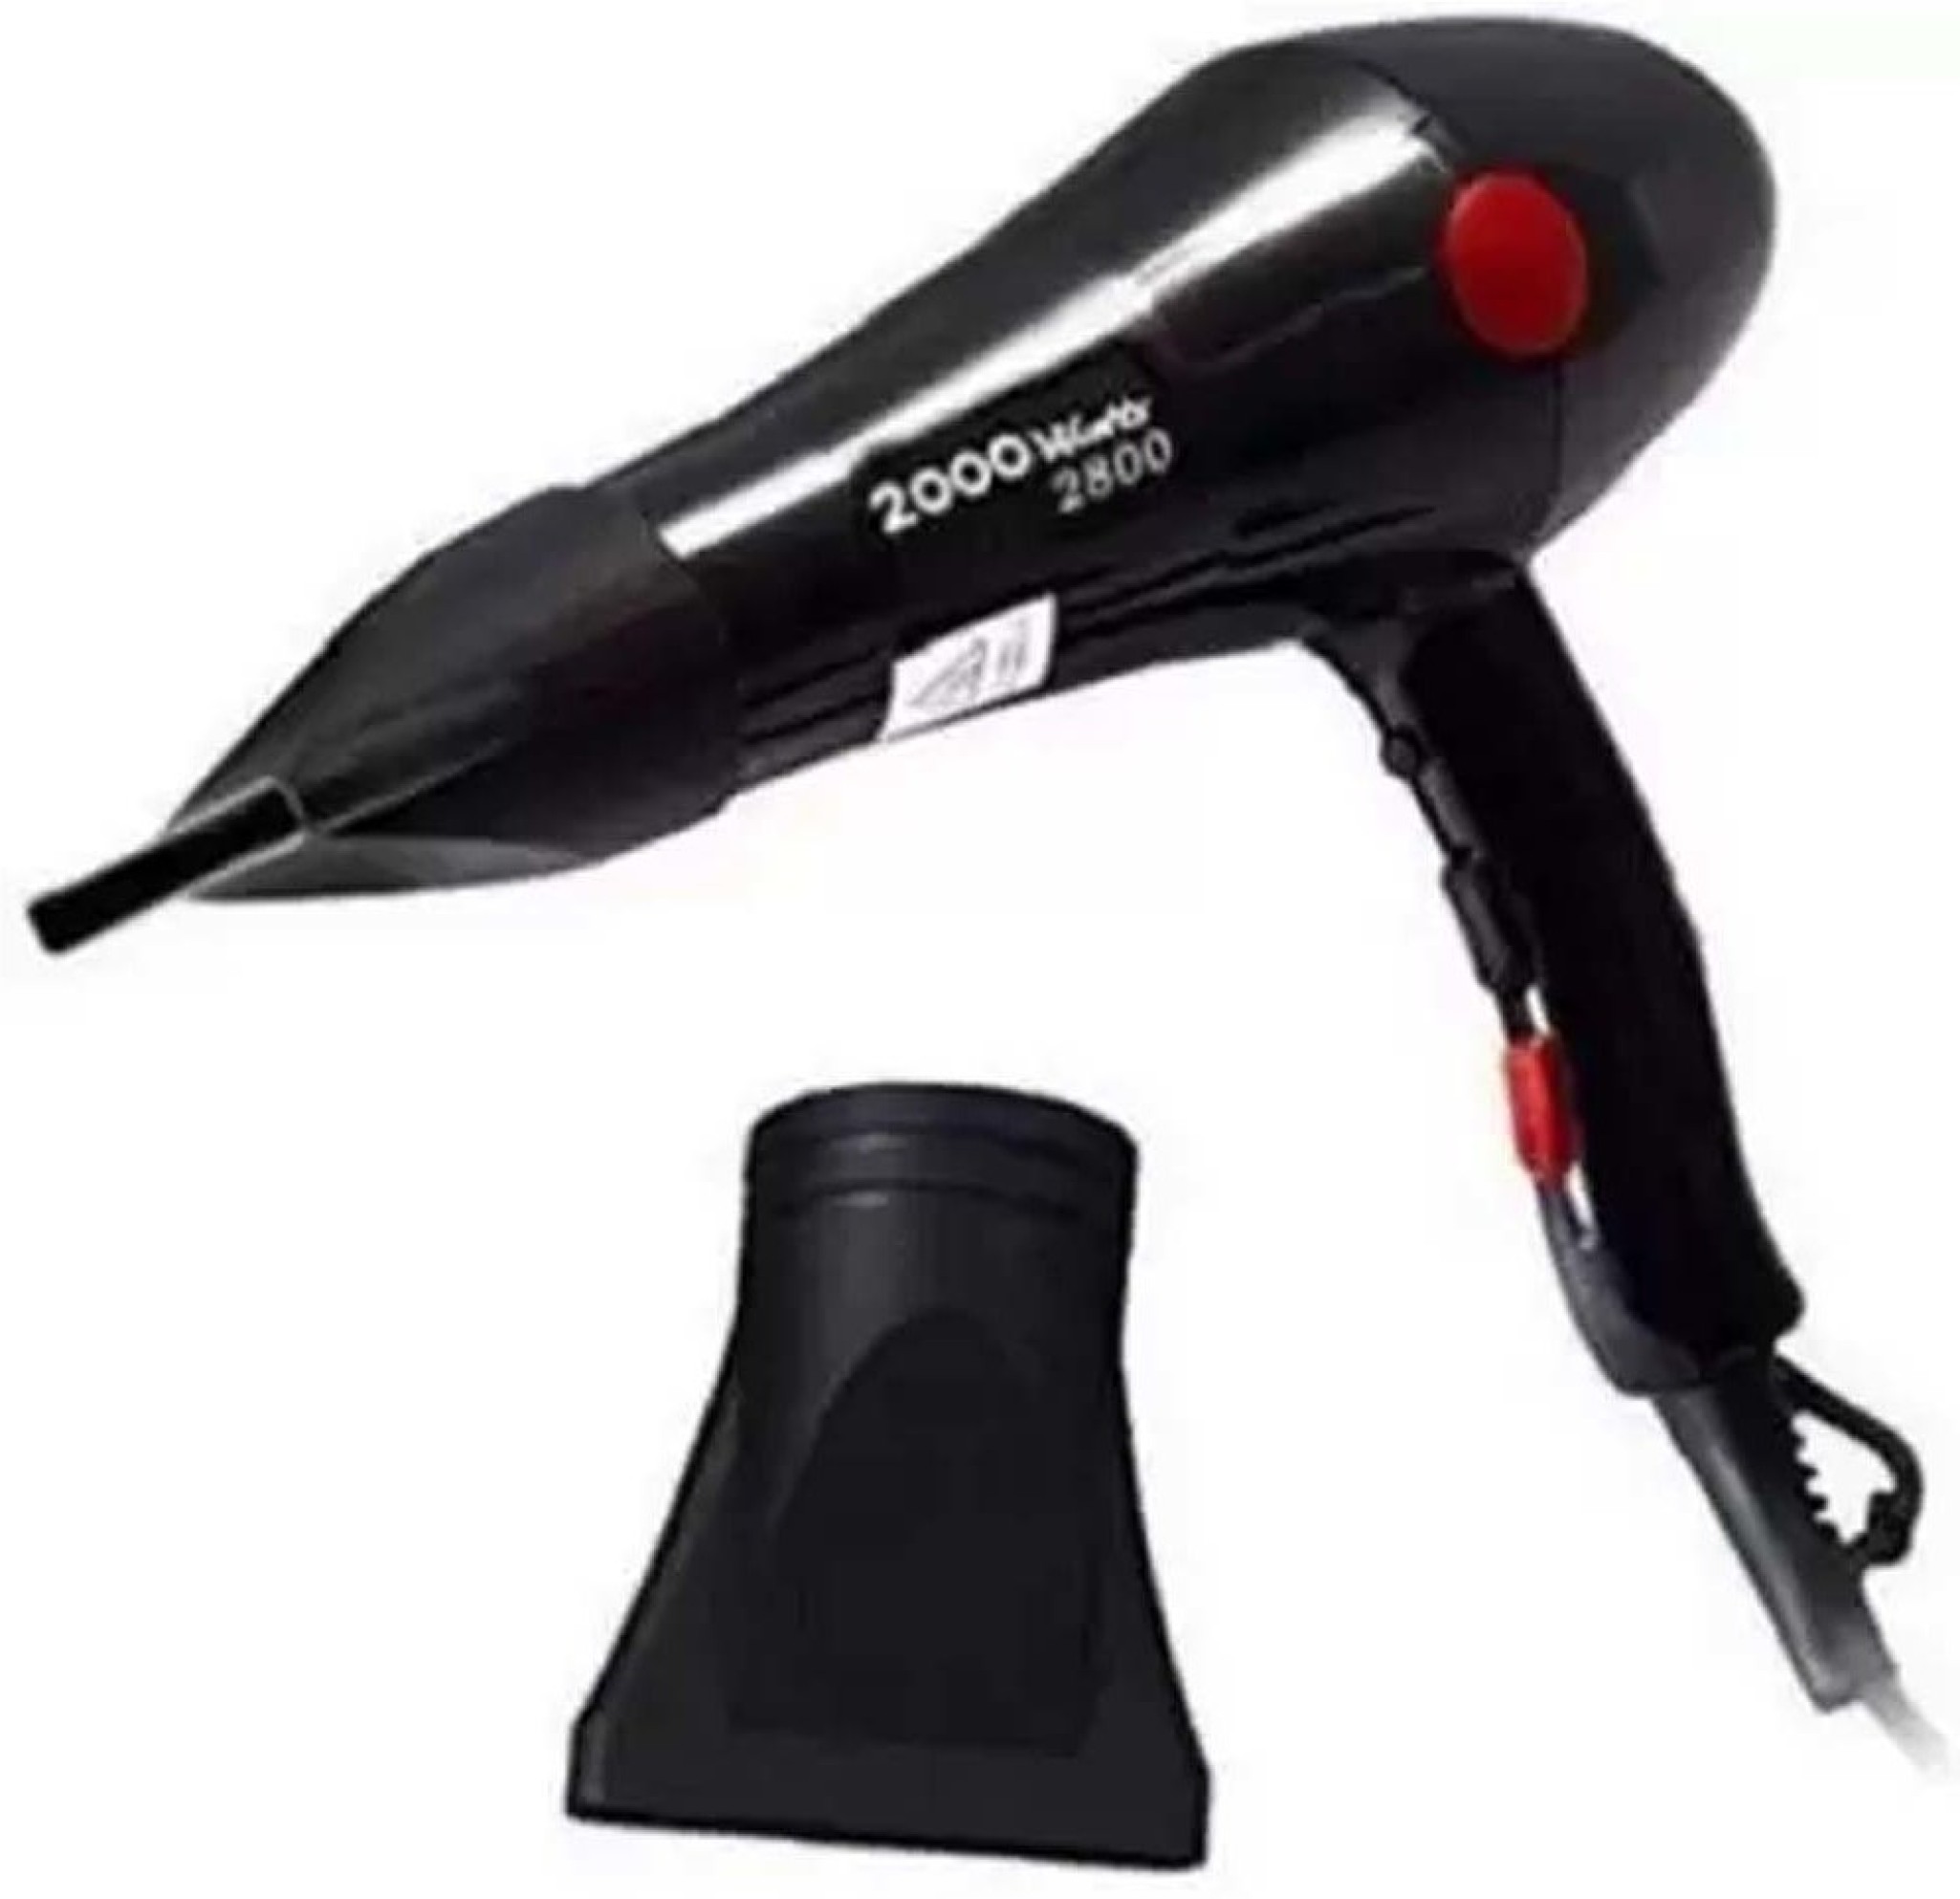 Wholesale High quality hair dryer new fashion blower made in China ZF8812  From malibabacom